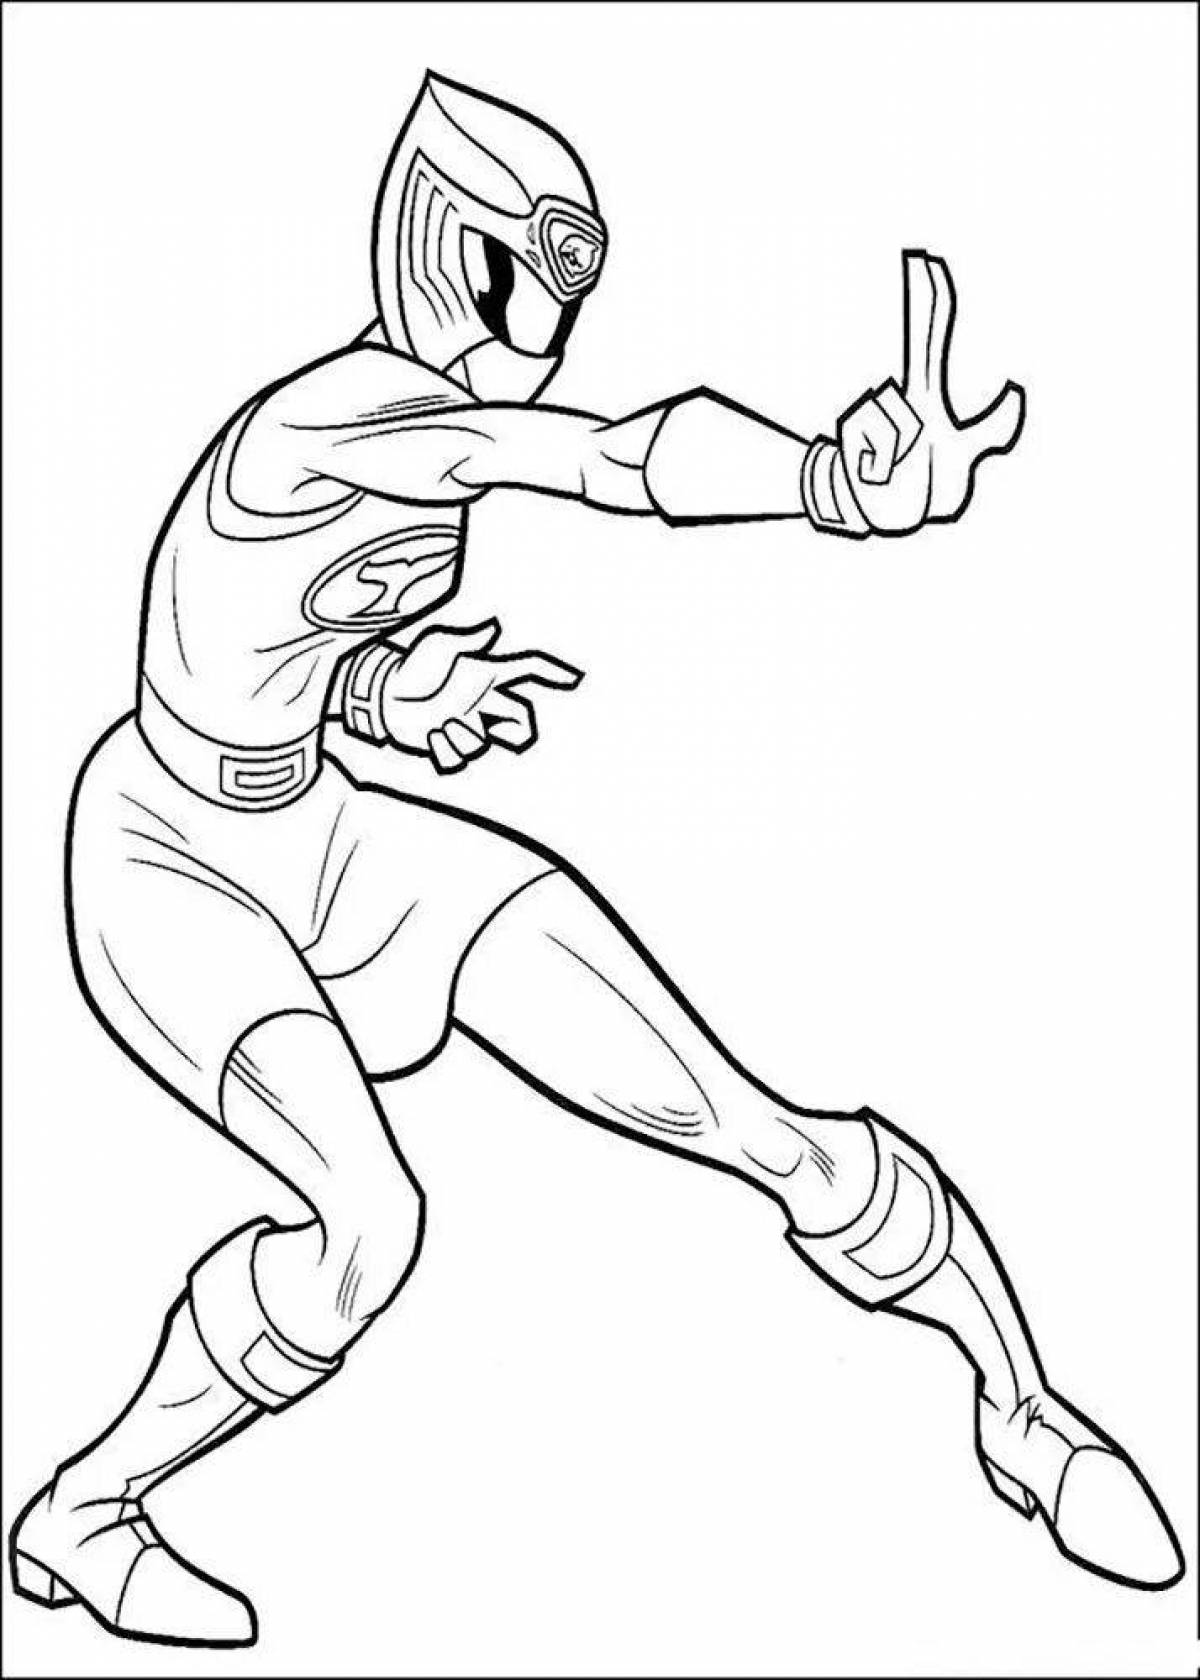 Intense Strength Coloring Page